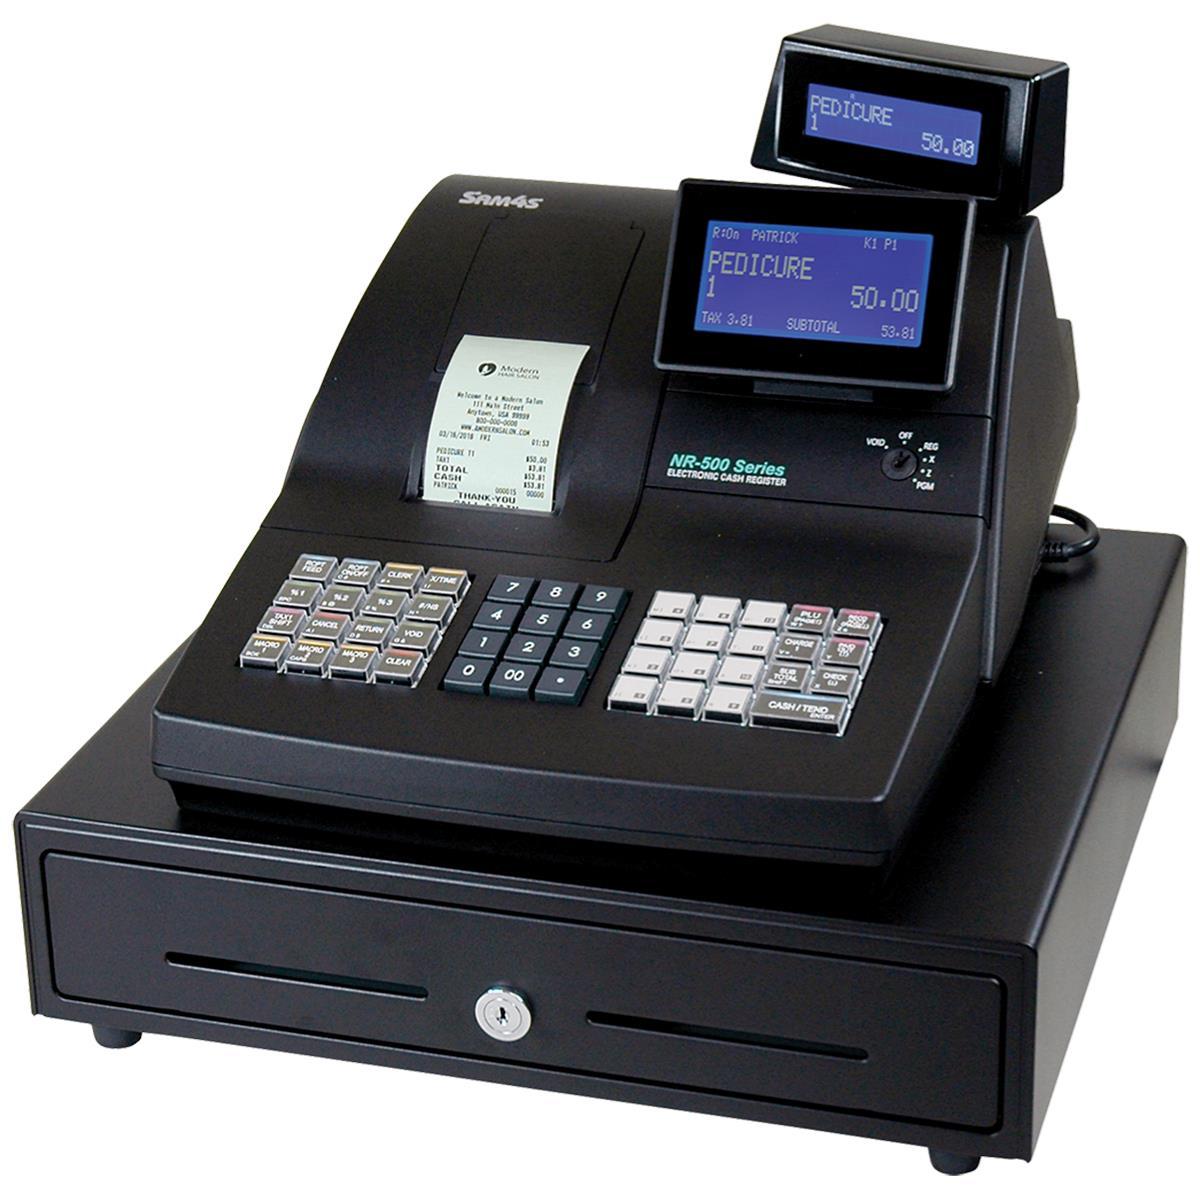 What is a Cash Register?